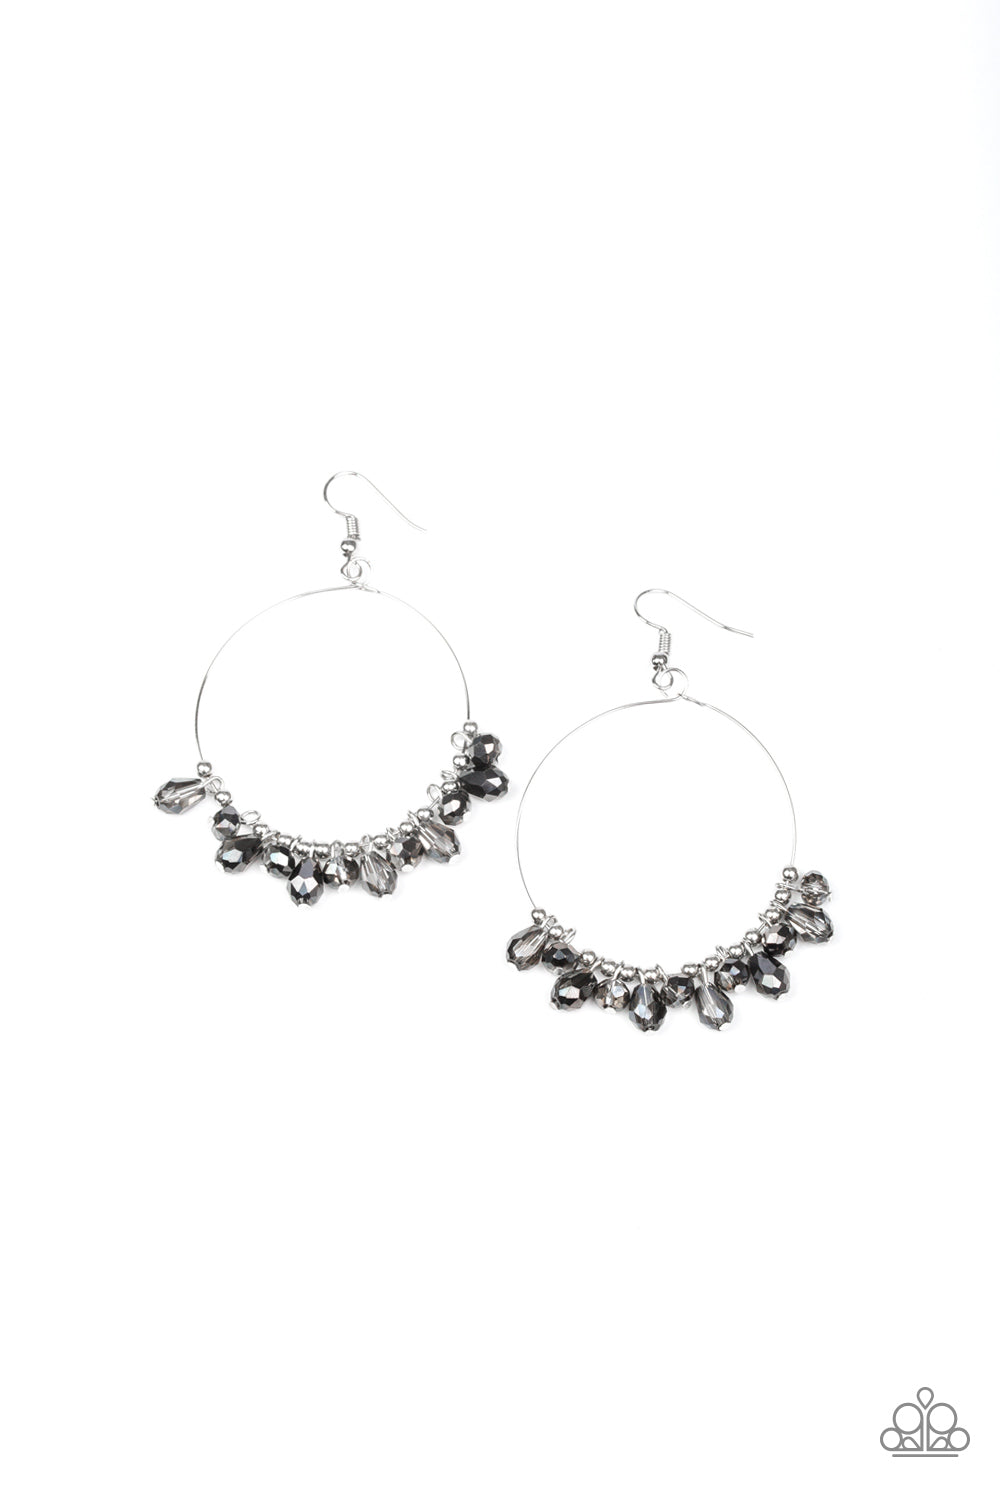 five-dollar-jewelry-crystal-collaboration-silver-earrings-paparazzi-accessories